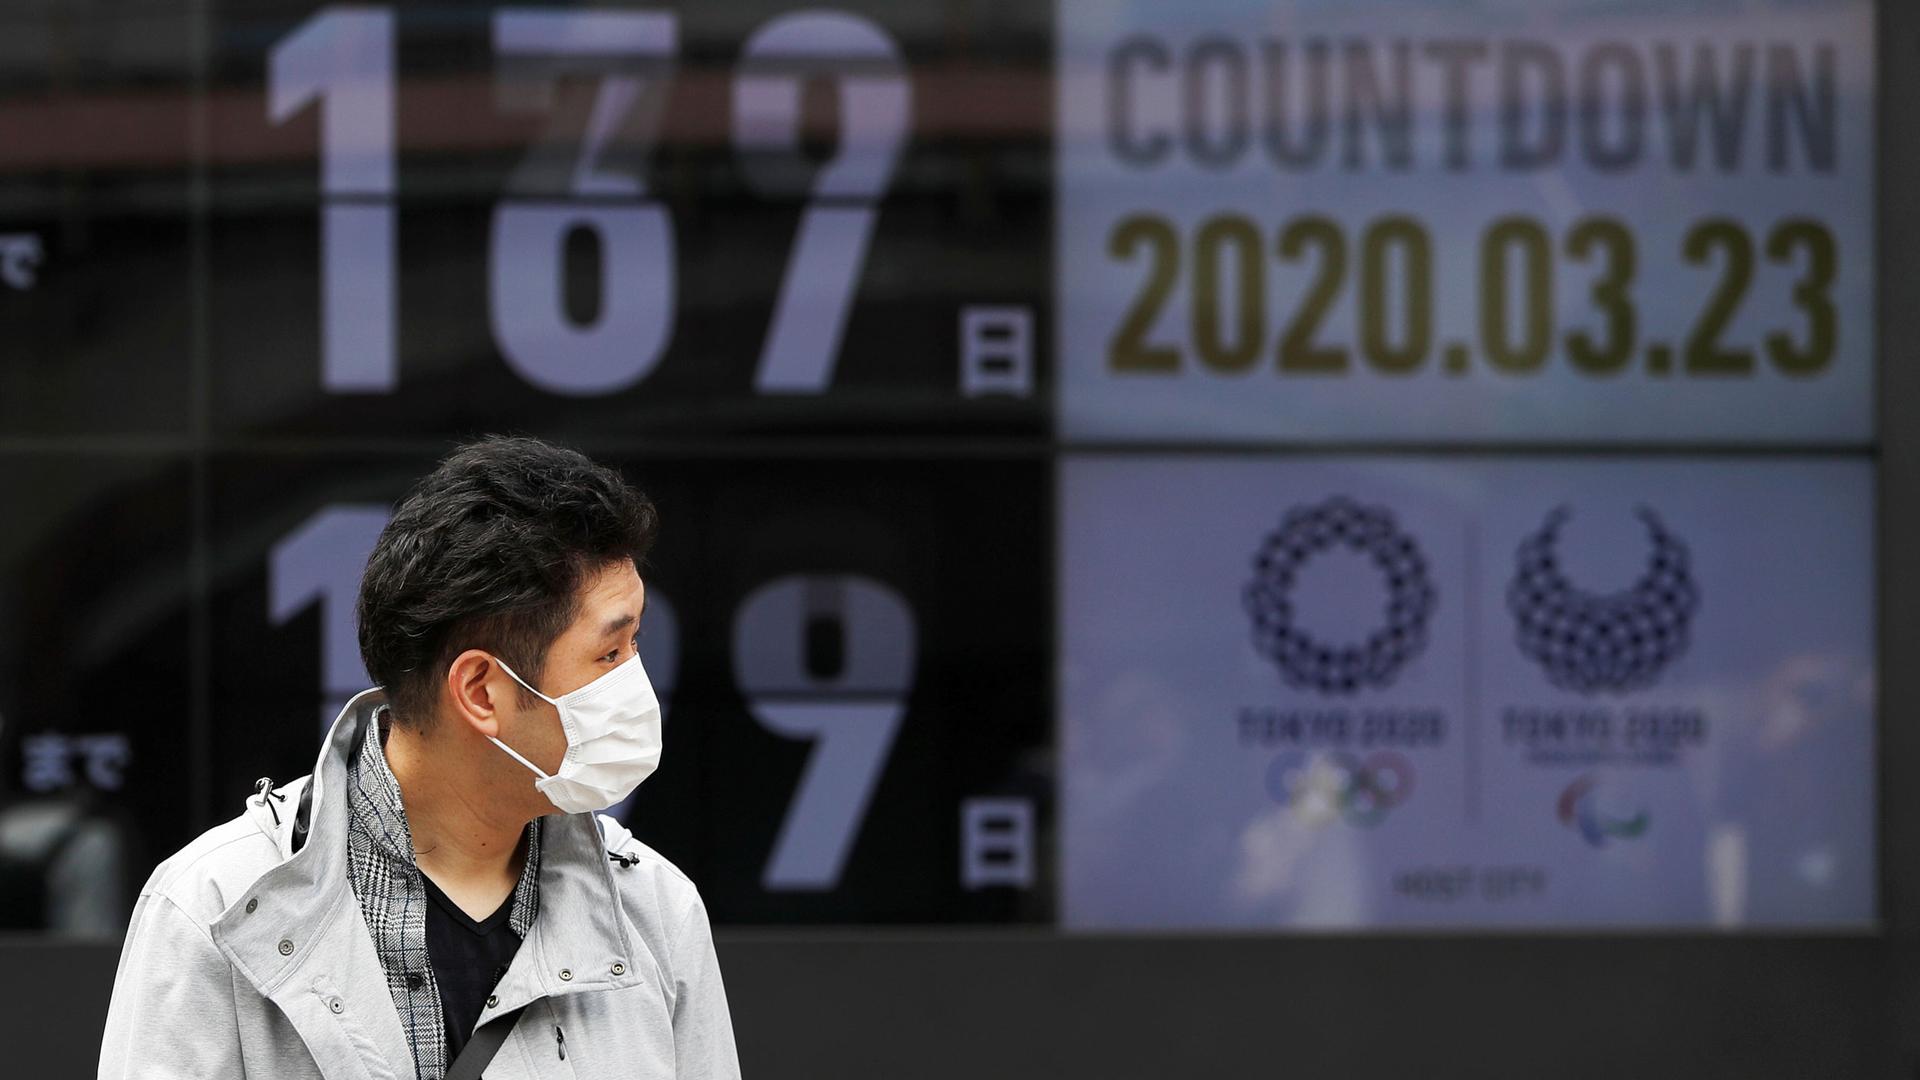 A man is shown wearing a face mask and walking in front of a countdown clock for the 2020 Olympics Games in Tokyo.